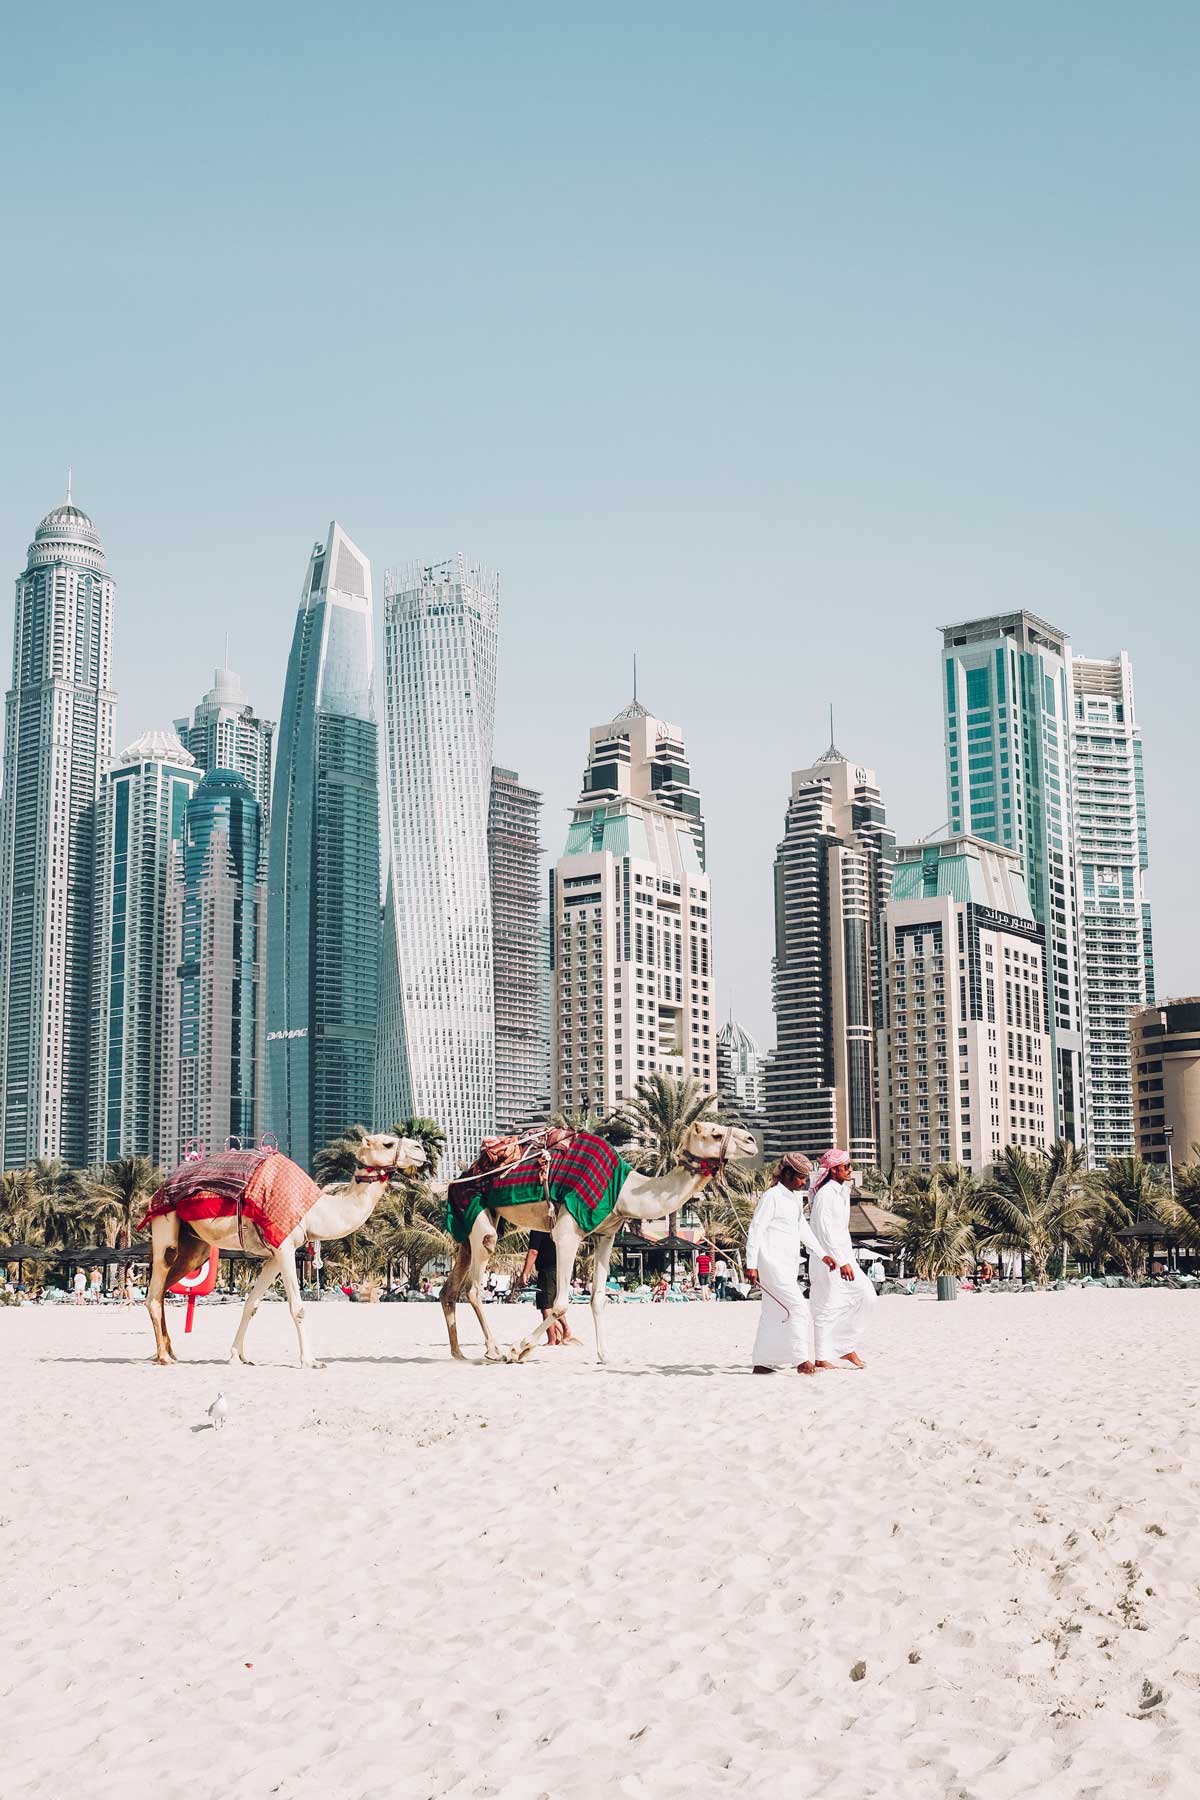 Kite Beach Dubai Design Week: How to Make the Most of Your Last Day